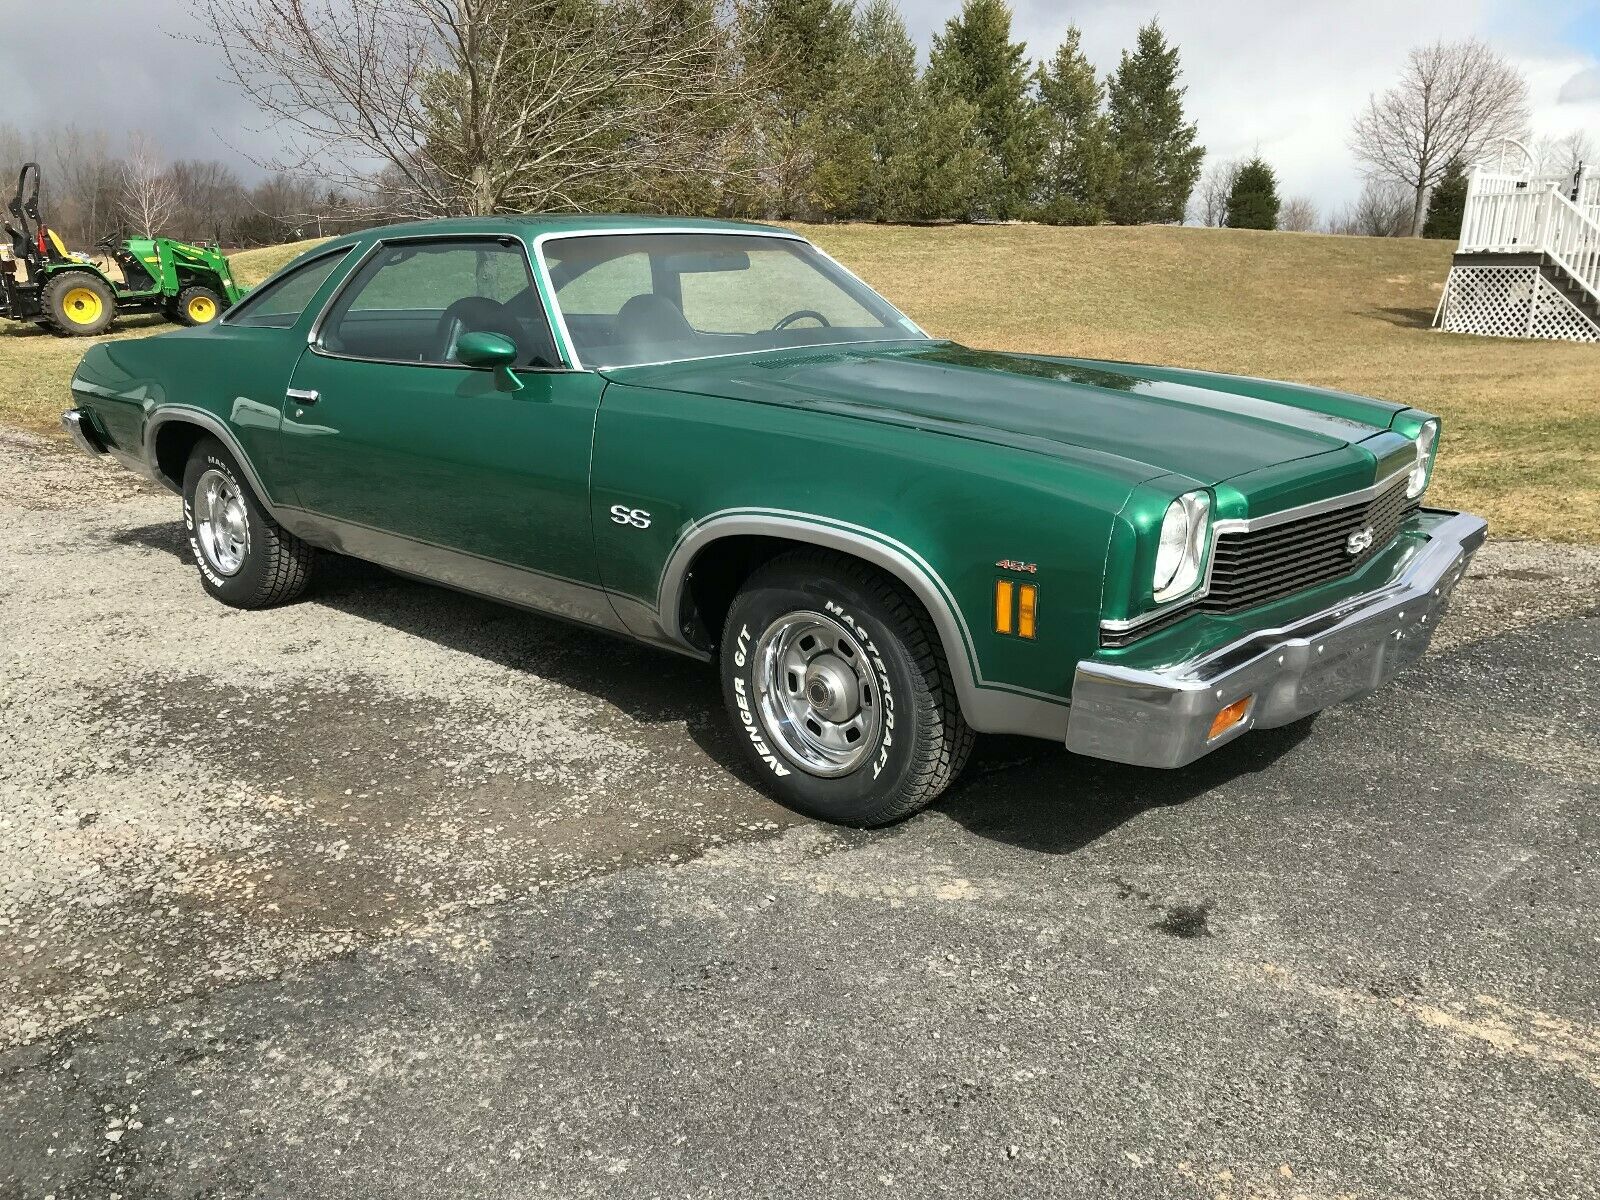 Springtime Green: It’s Not Everyday A 1973 Chevrolet Chevelle SS454 Pops Up!